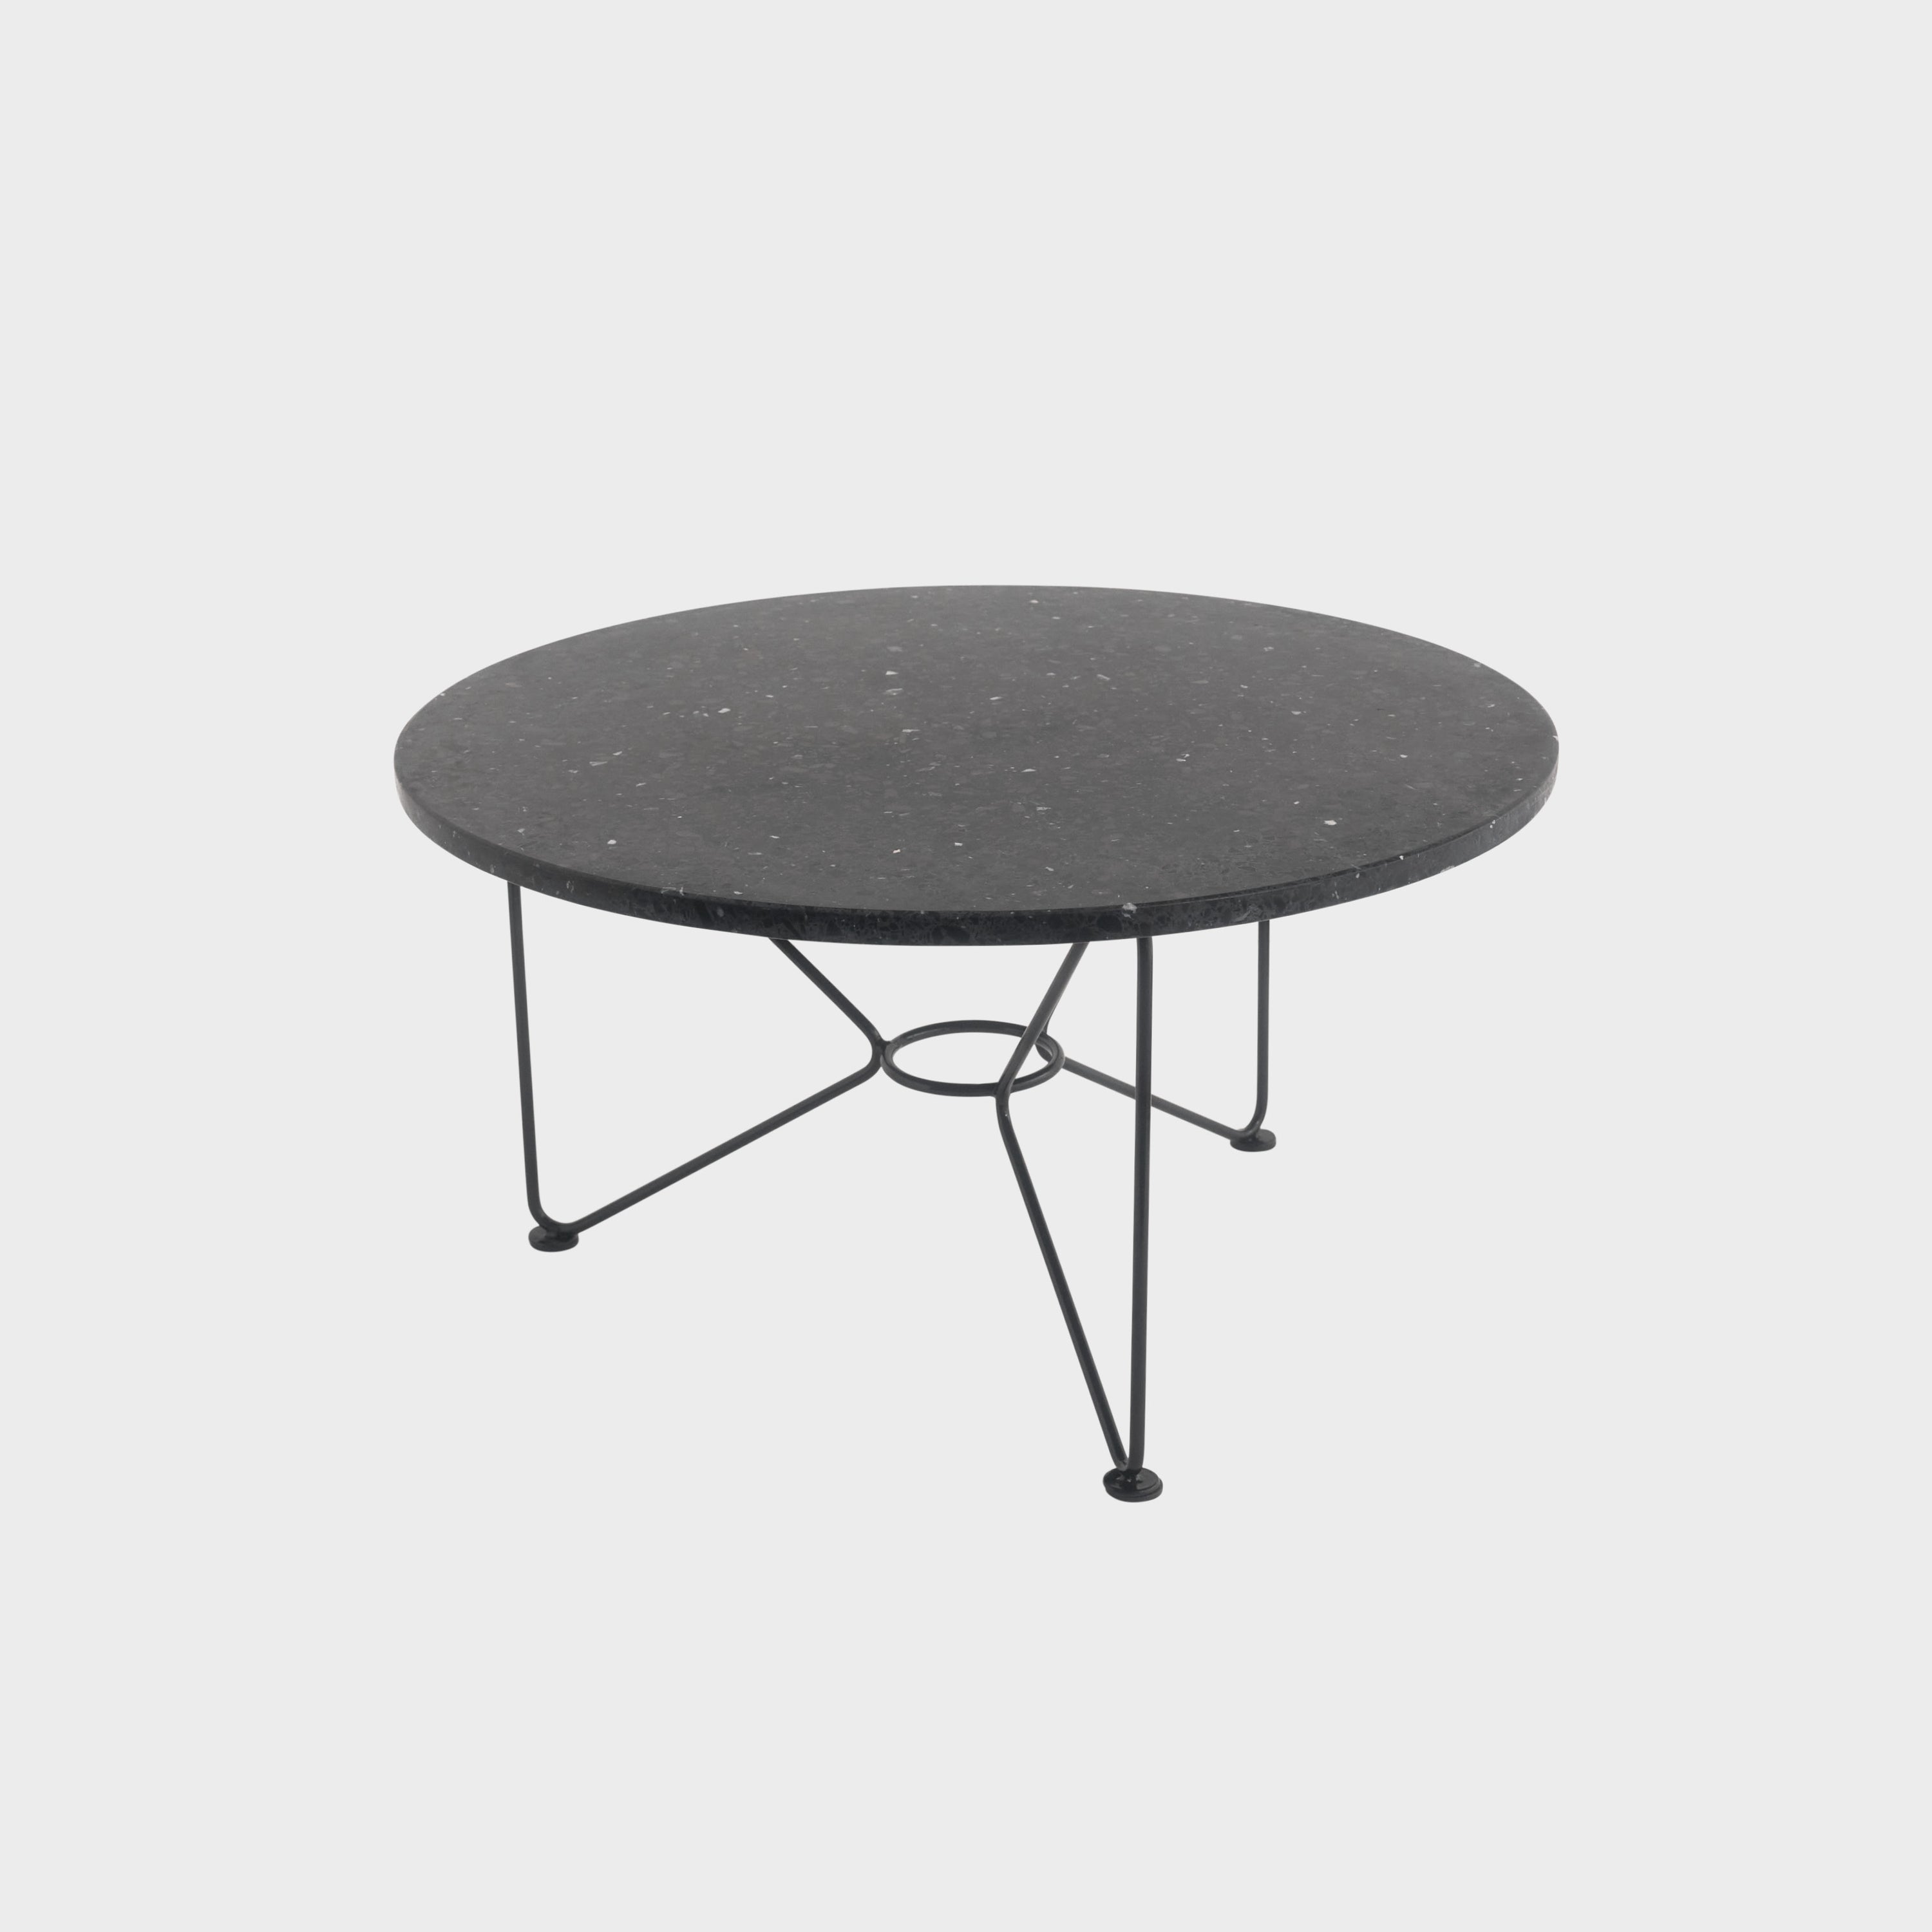 The Low Table Tierra Black